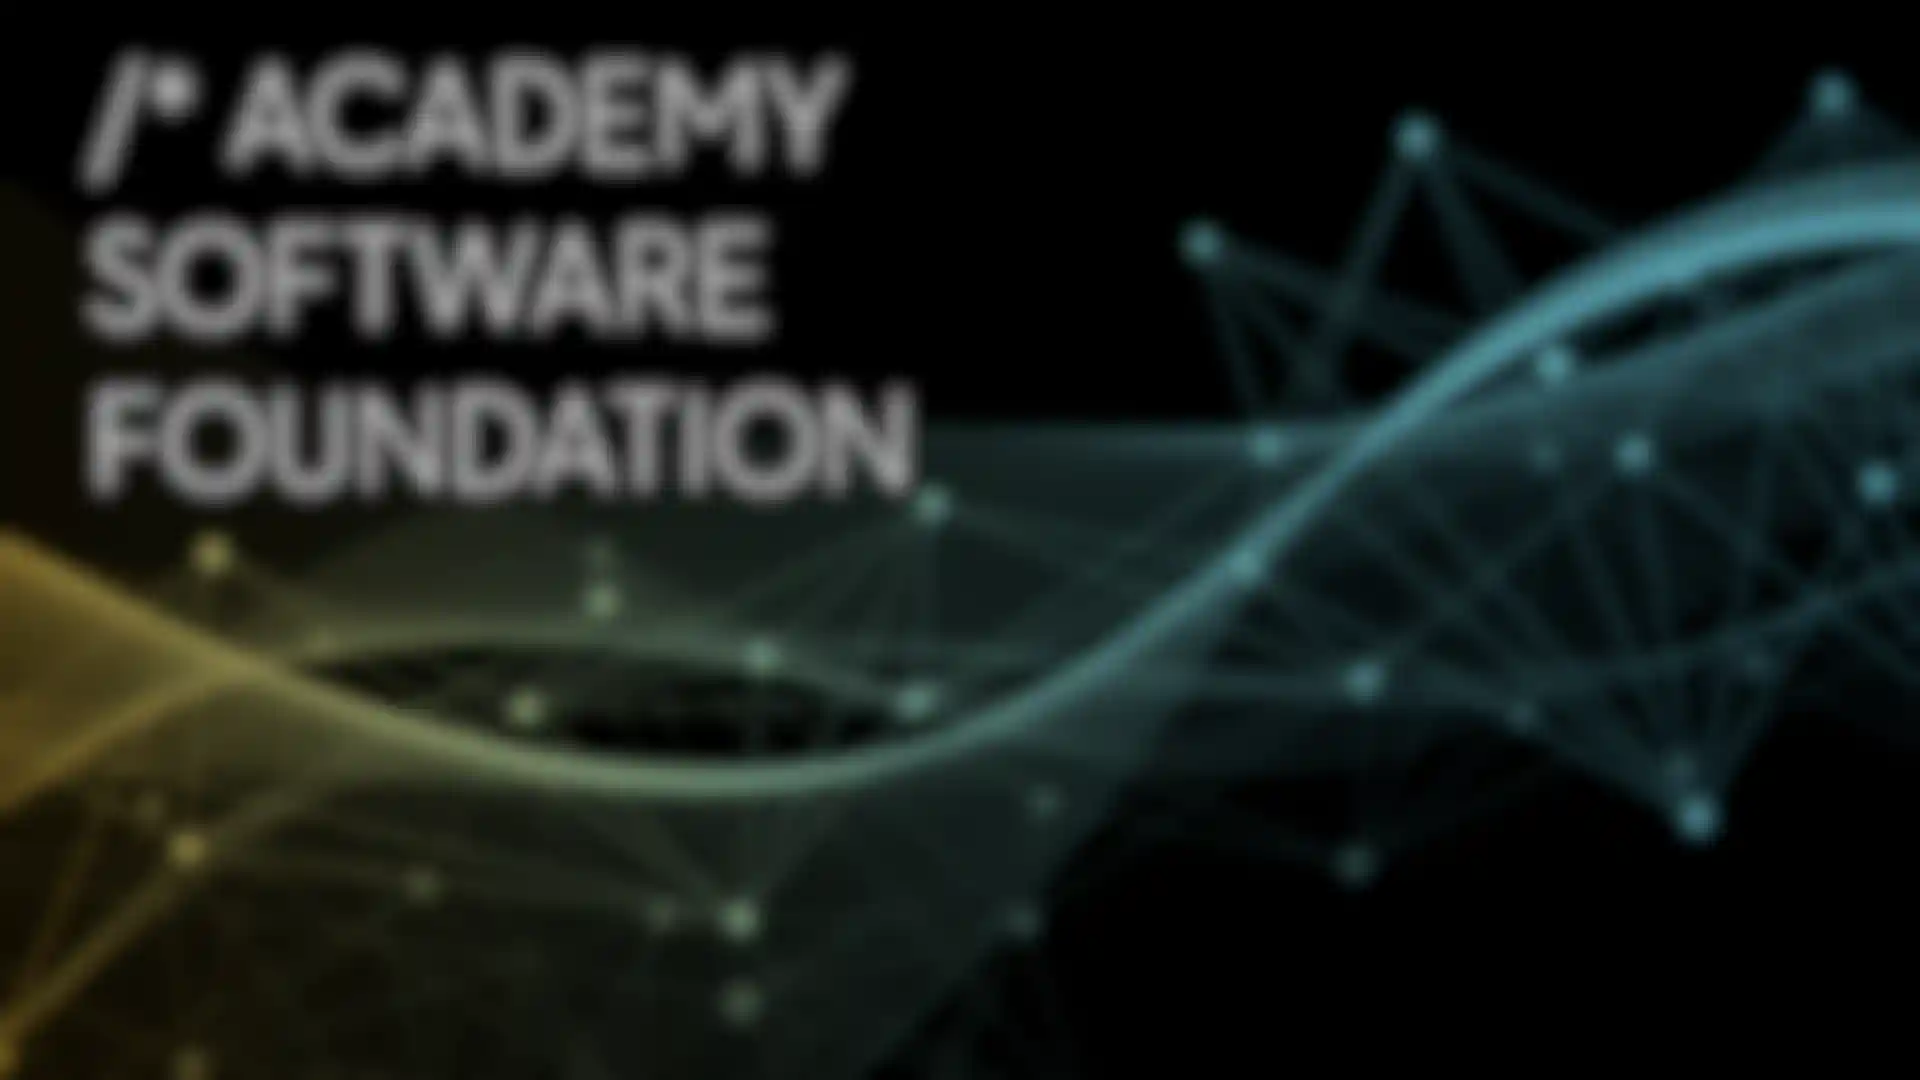 Maxon Joins the Academy Software Foundation image